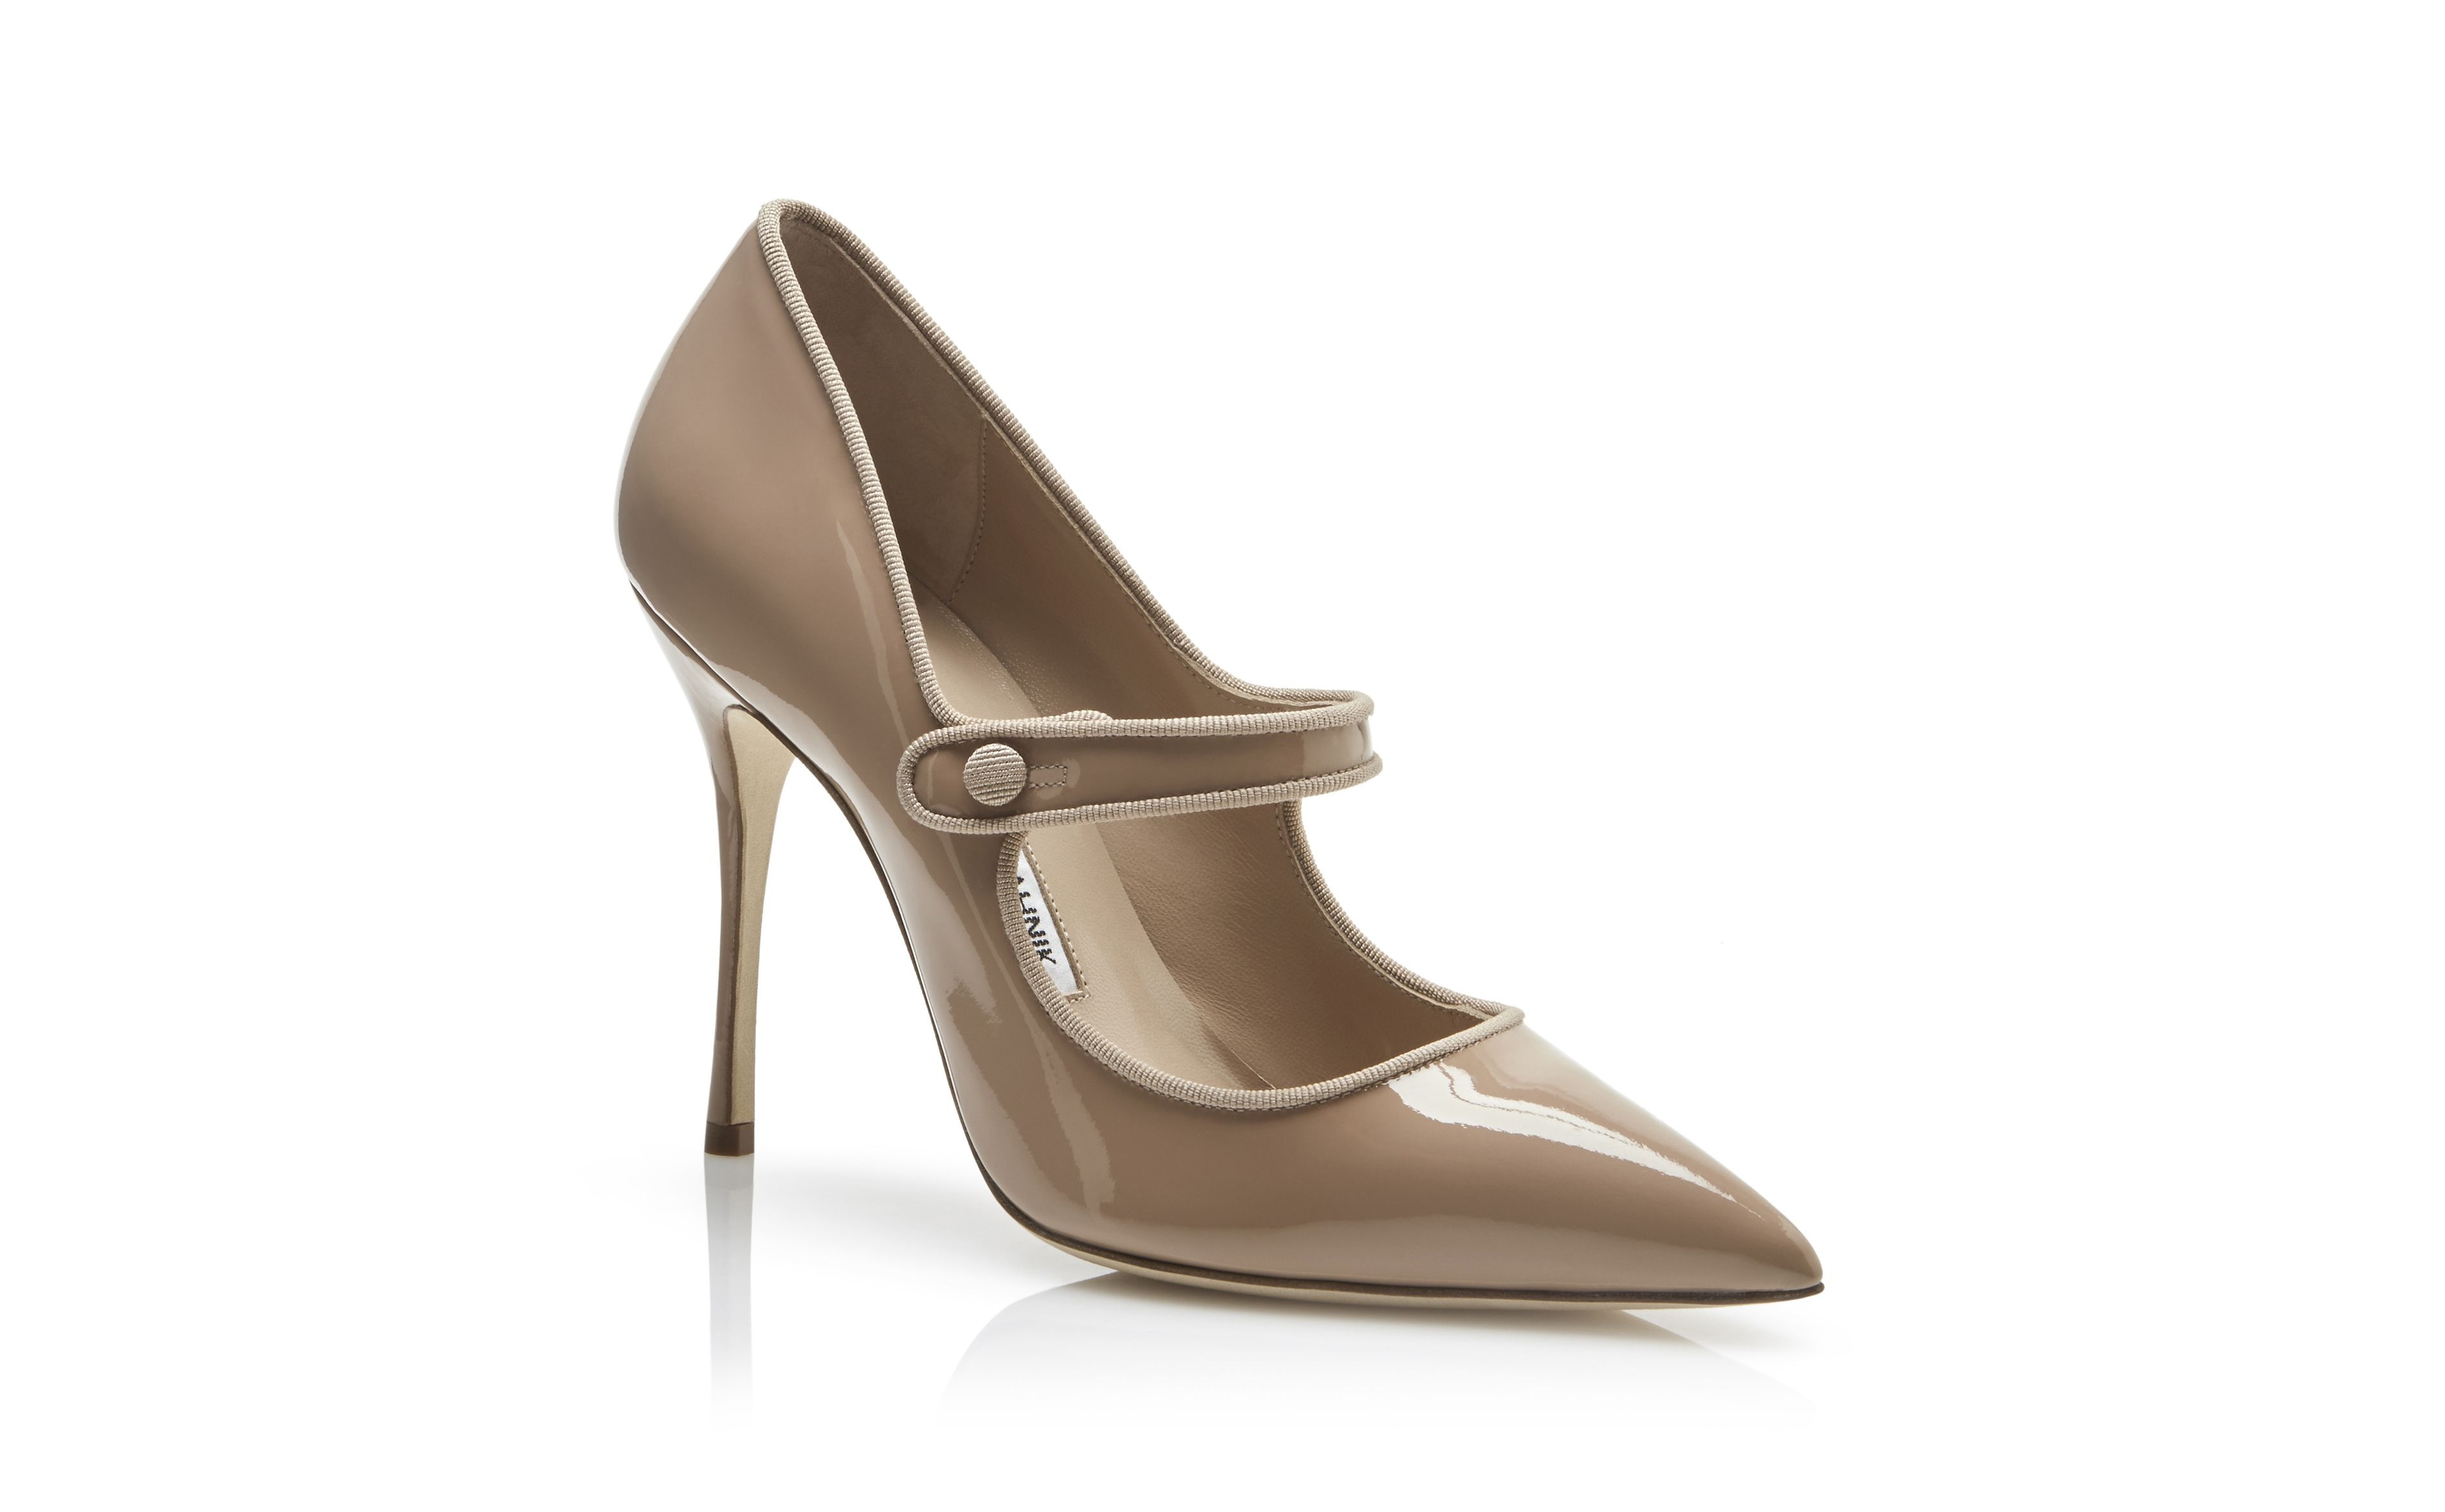 Cool Beige Patent Leather Pointed Toe Pumps - 3